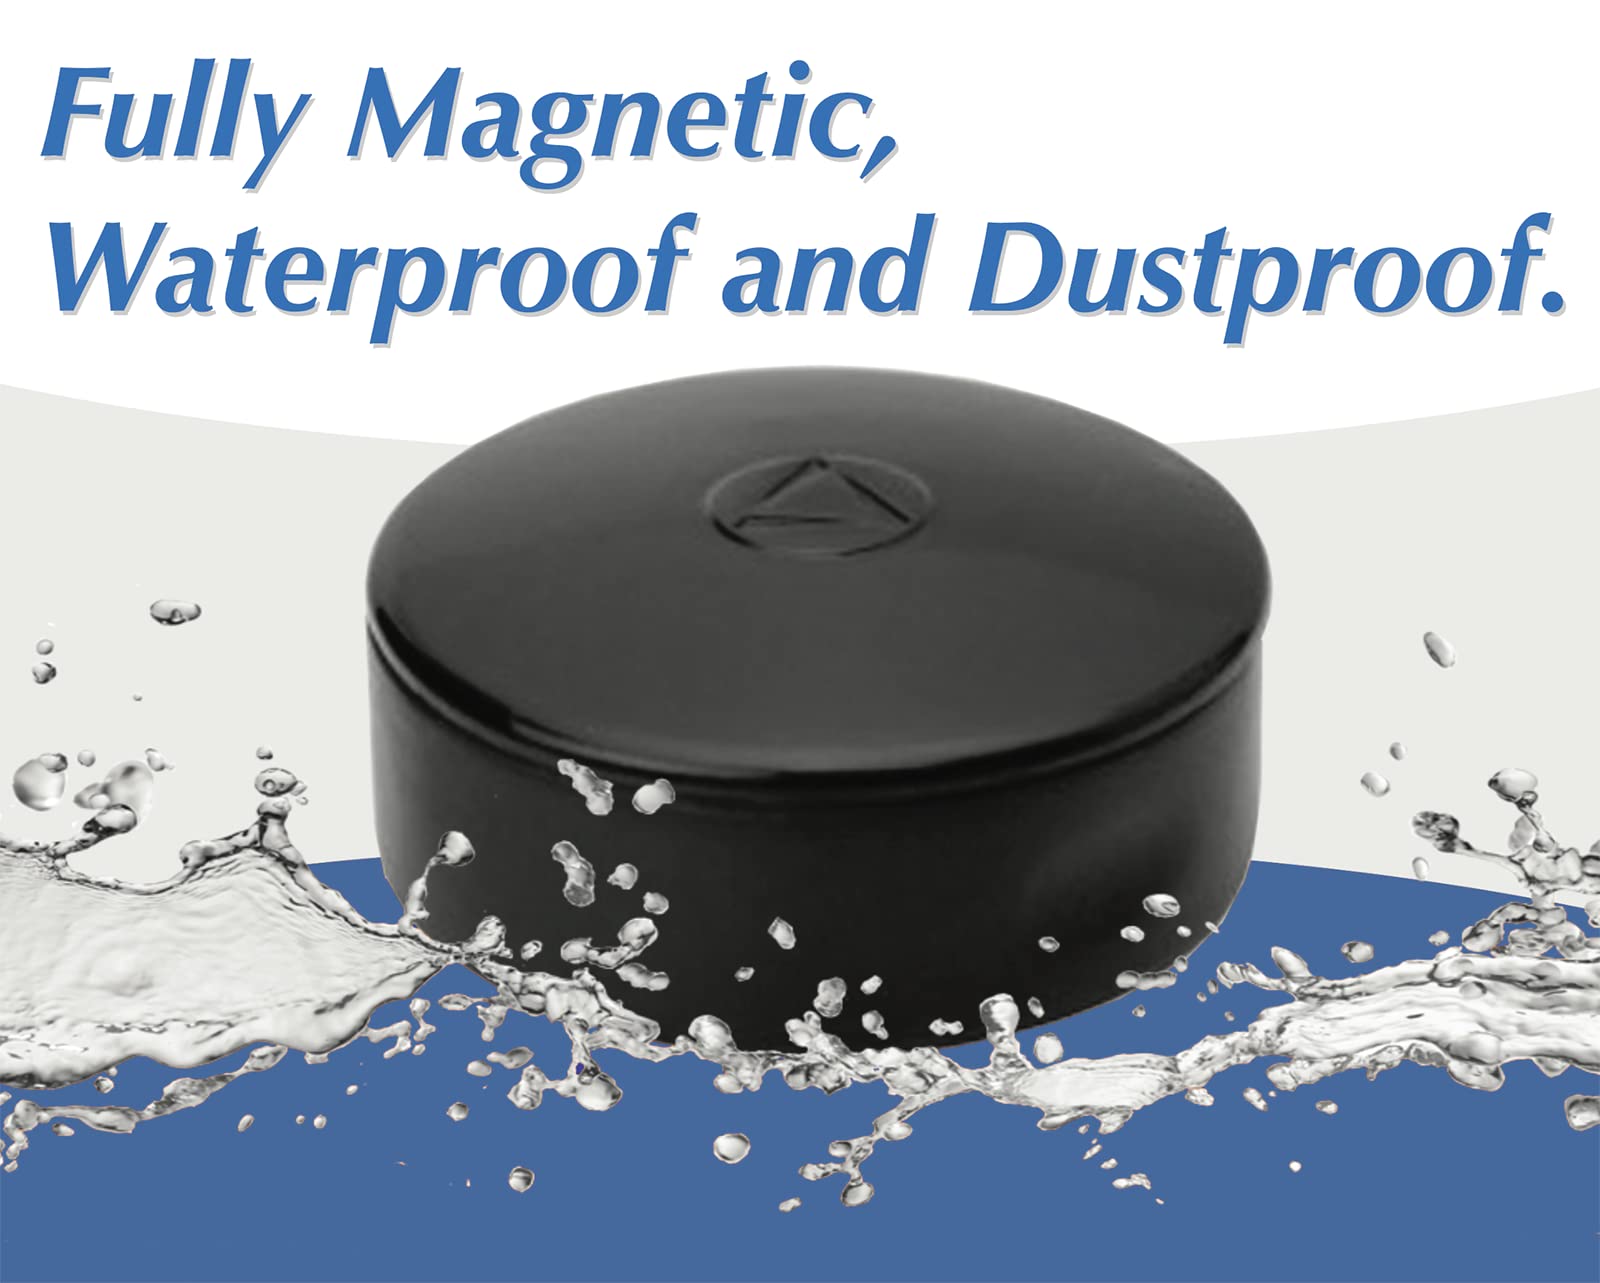 LandAirSea 54 GPS Tracker, - Waterproof Magnet Mount. Full Global Coverage. 4G LTE Real-Time Tracking for Vehicle, Asset, Fleet, Elderly and more. Subscription is required,Black